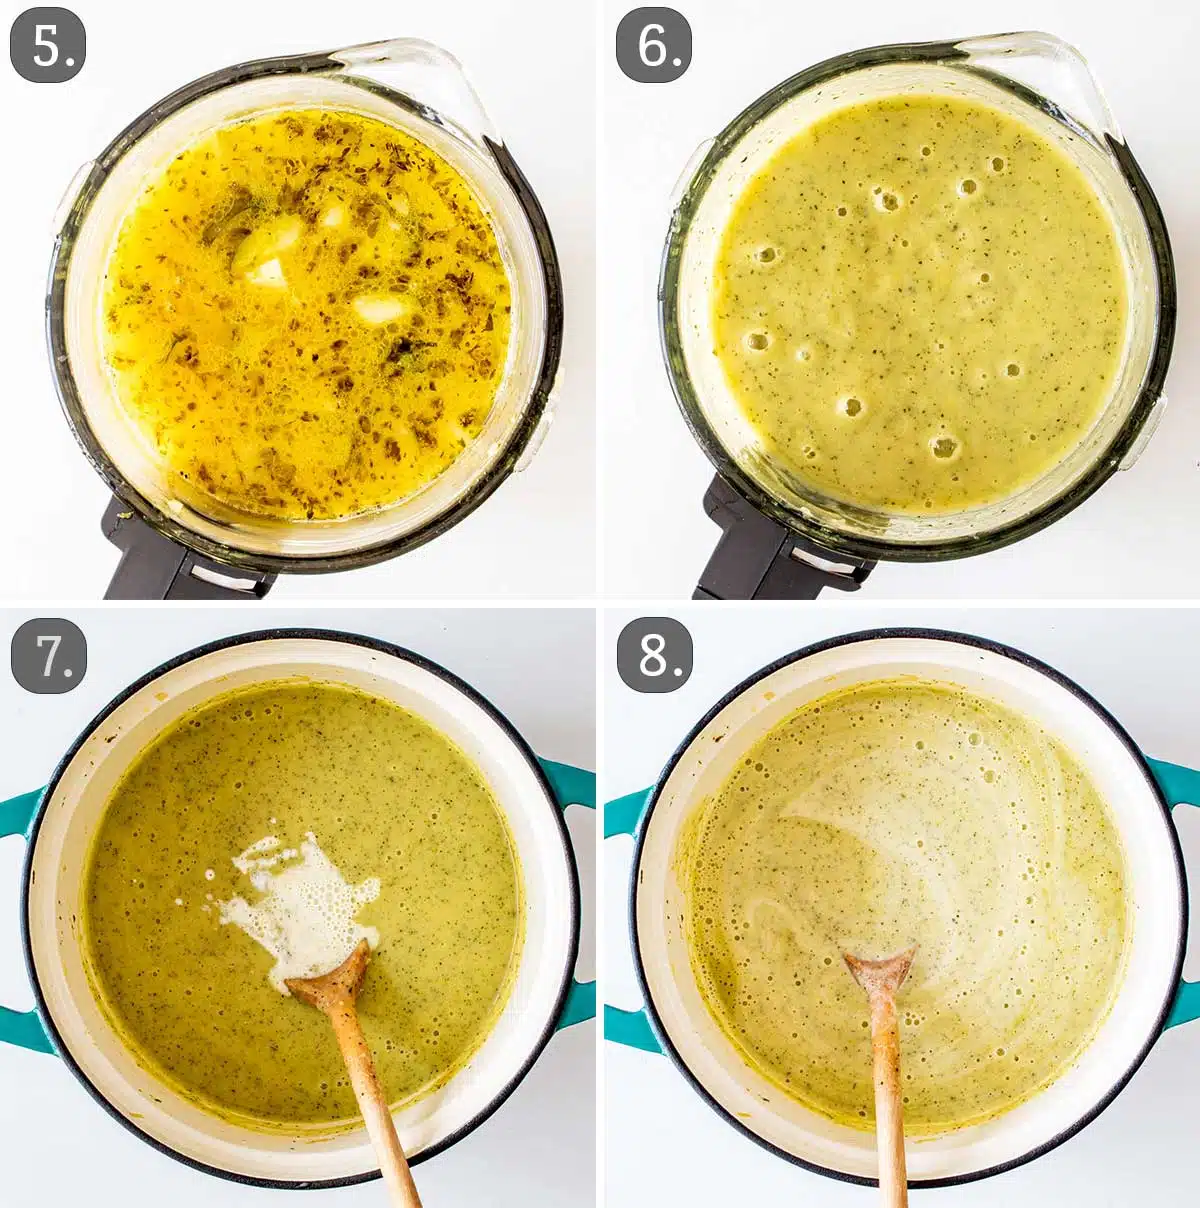 process shots showing how to blend zucchini soup and how to finish making it.